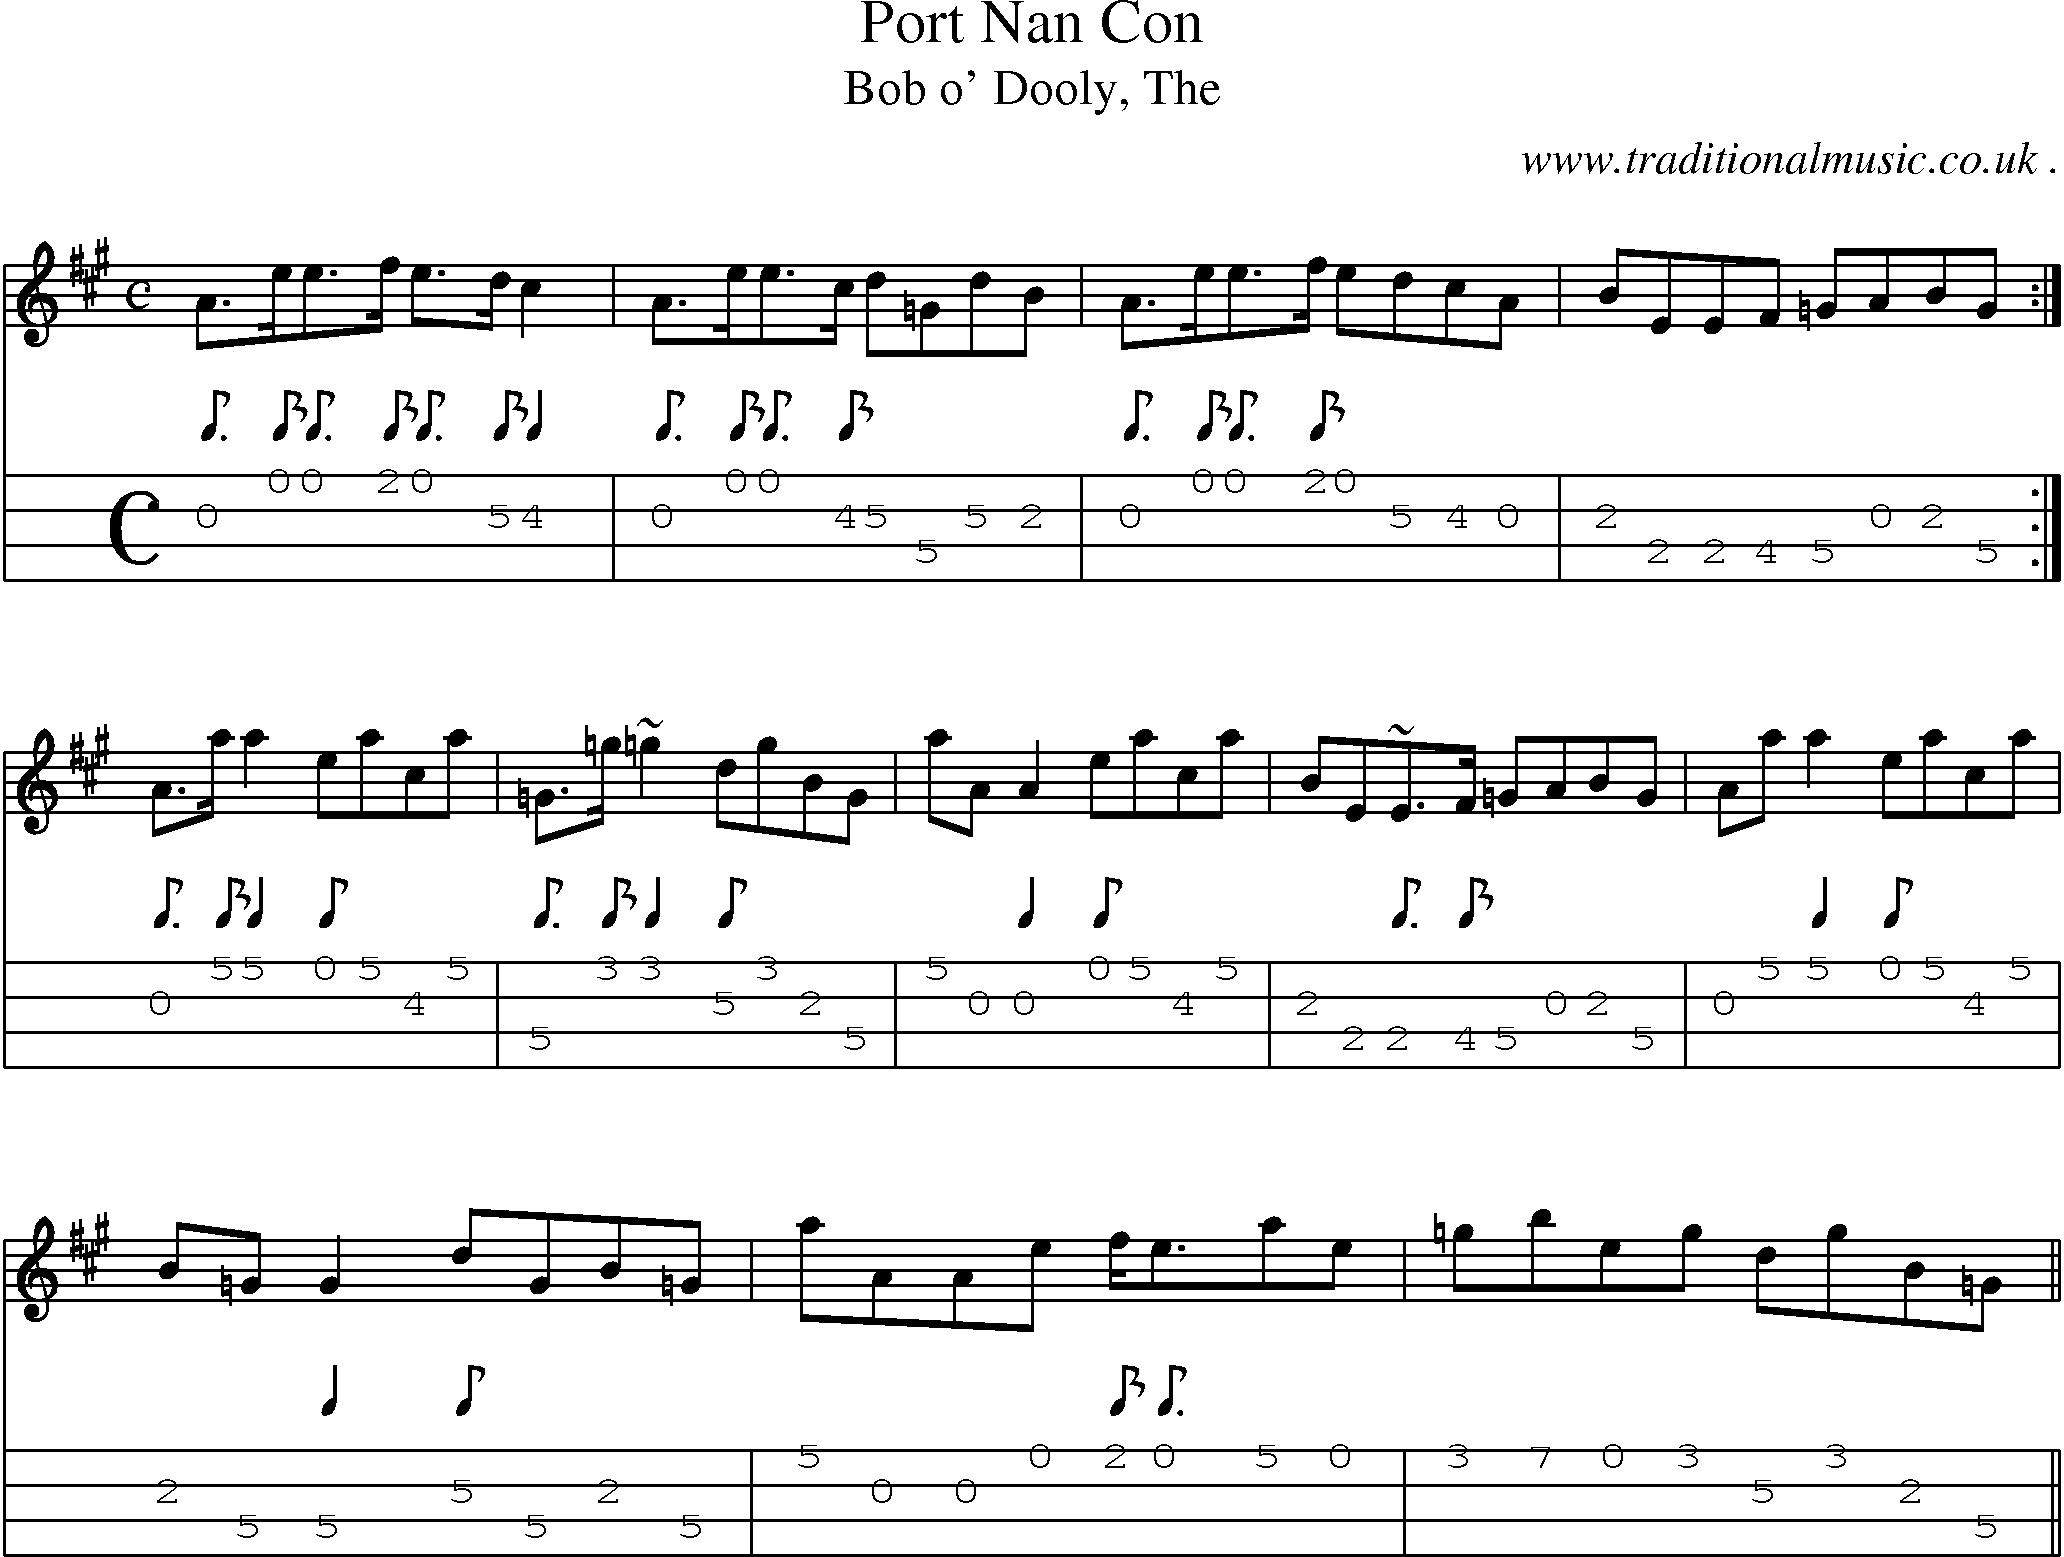 Sheet-music  score, Chords and Mandolin Tabs for Port Nan Con